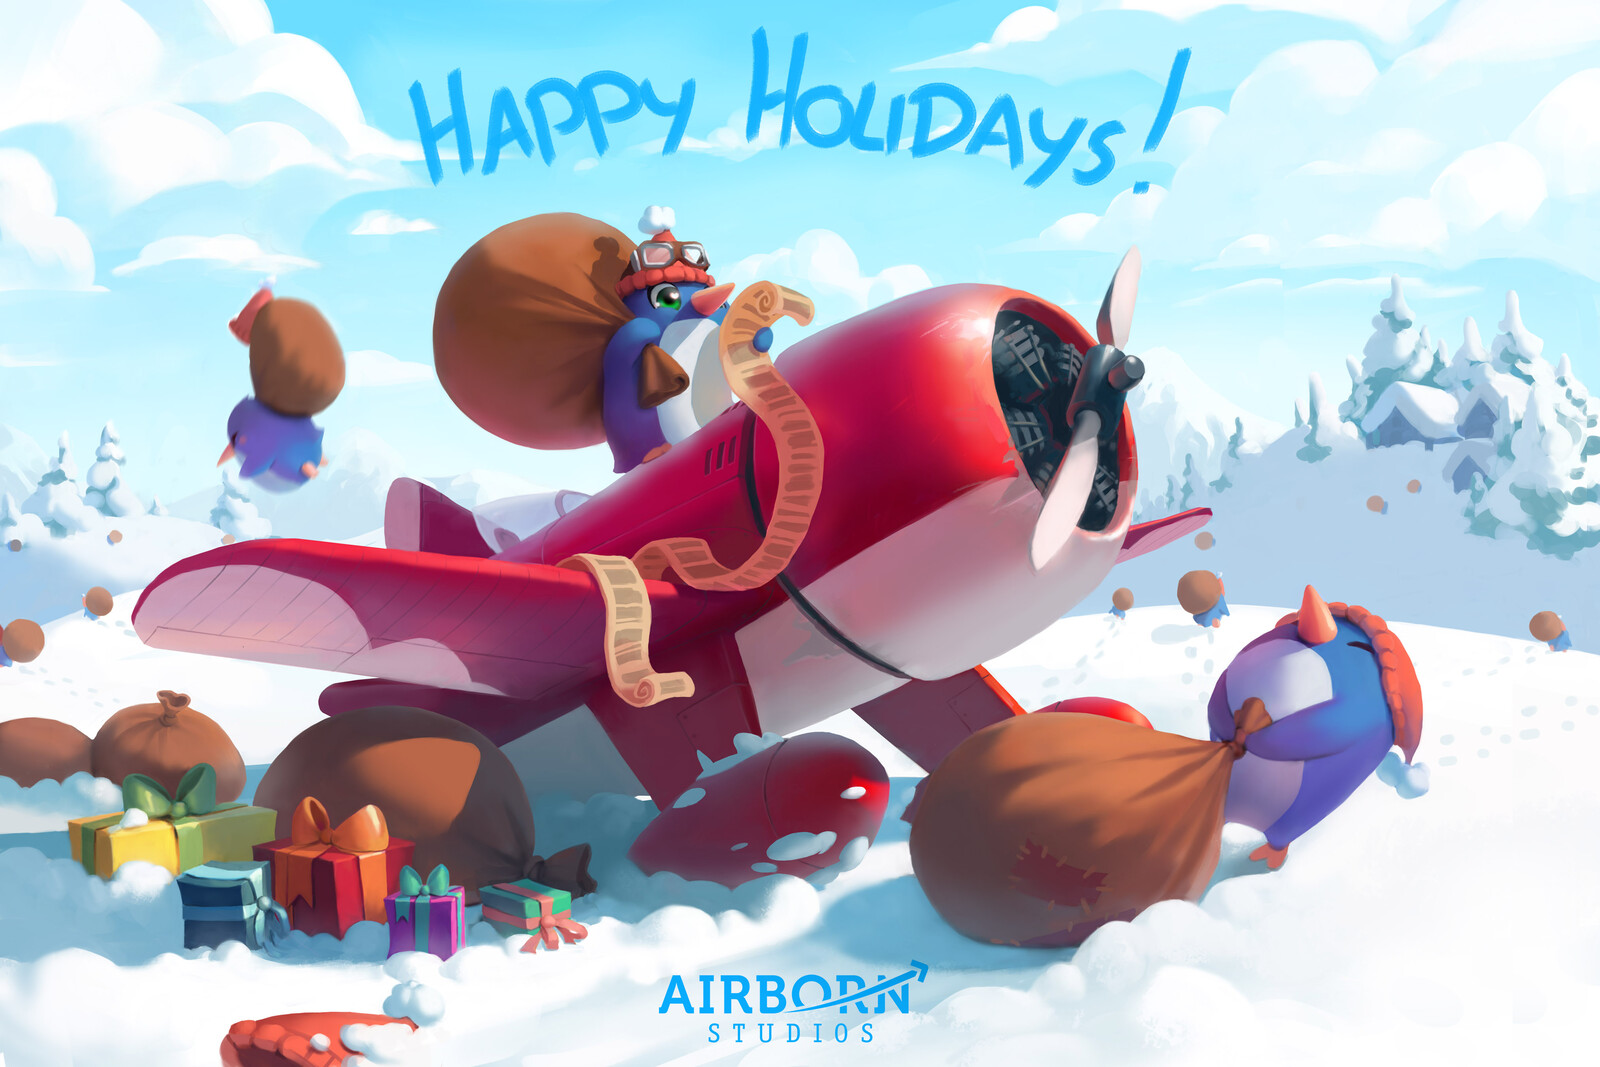 Happy holidays from Airborn Studios!